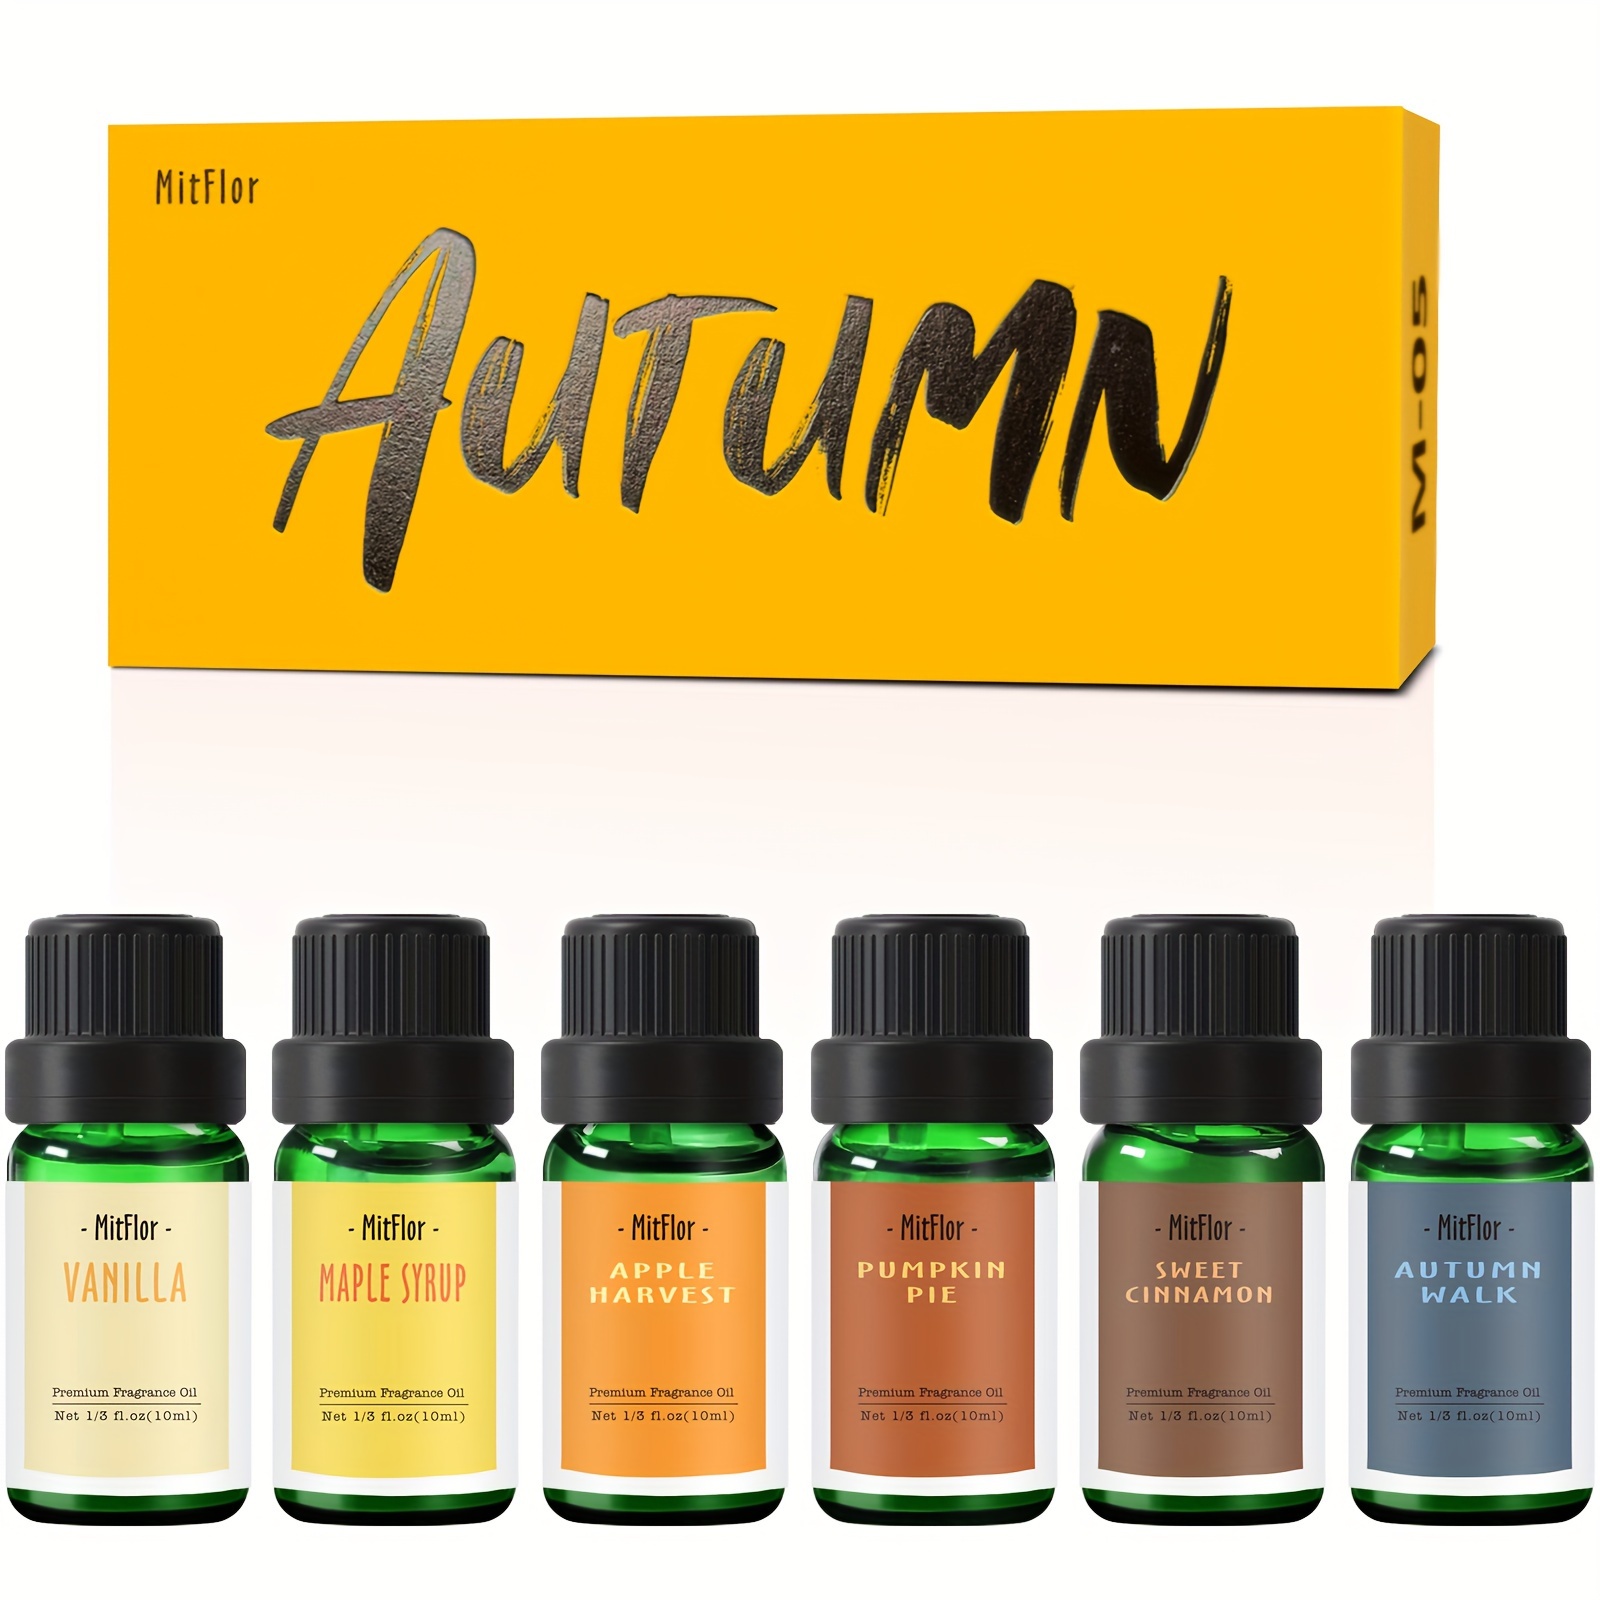 

Fragrance Oils, Mitflor Autumn Set Of 6 Premium Essential Oils For Diffusers For Home, Candle Making Scents, Aromatherapy Gift Set For Halloween Christmas, Pumpkin Pie, Maple Syrup & Autumn Walk